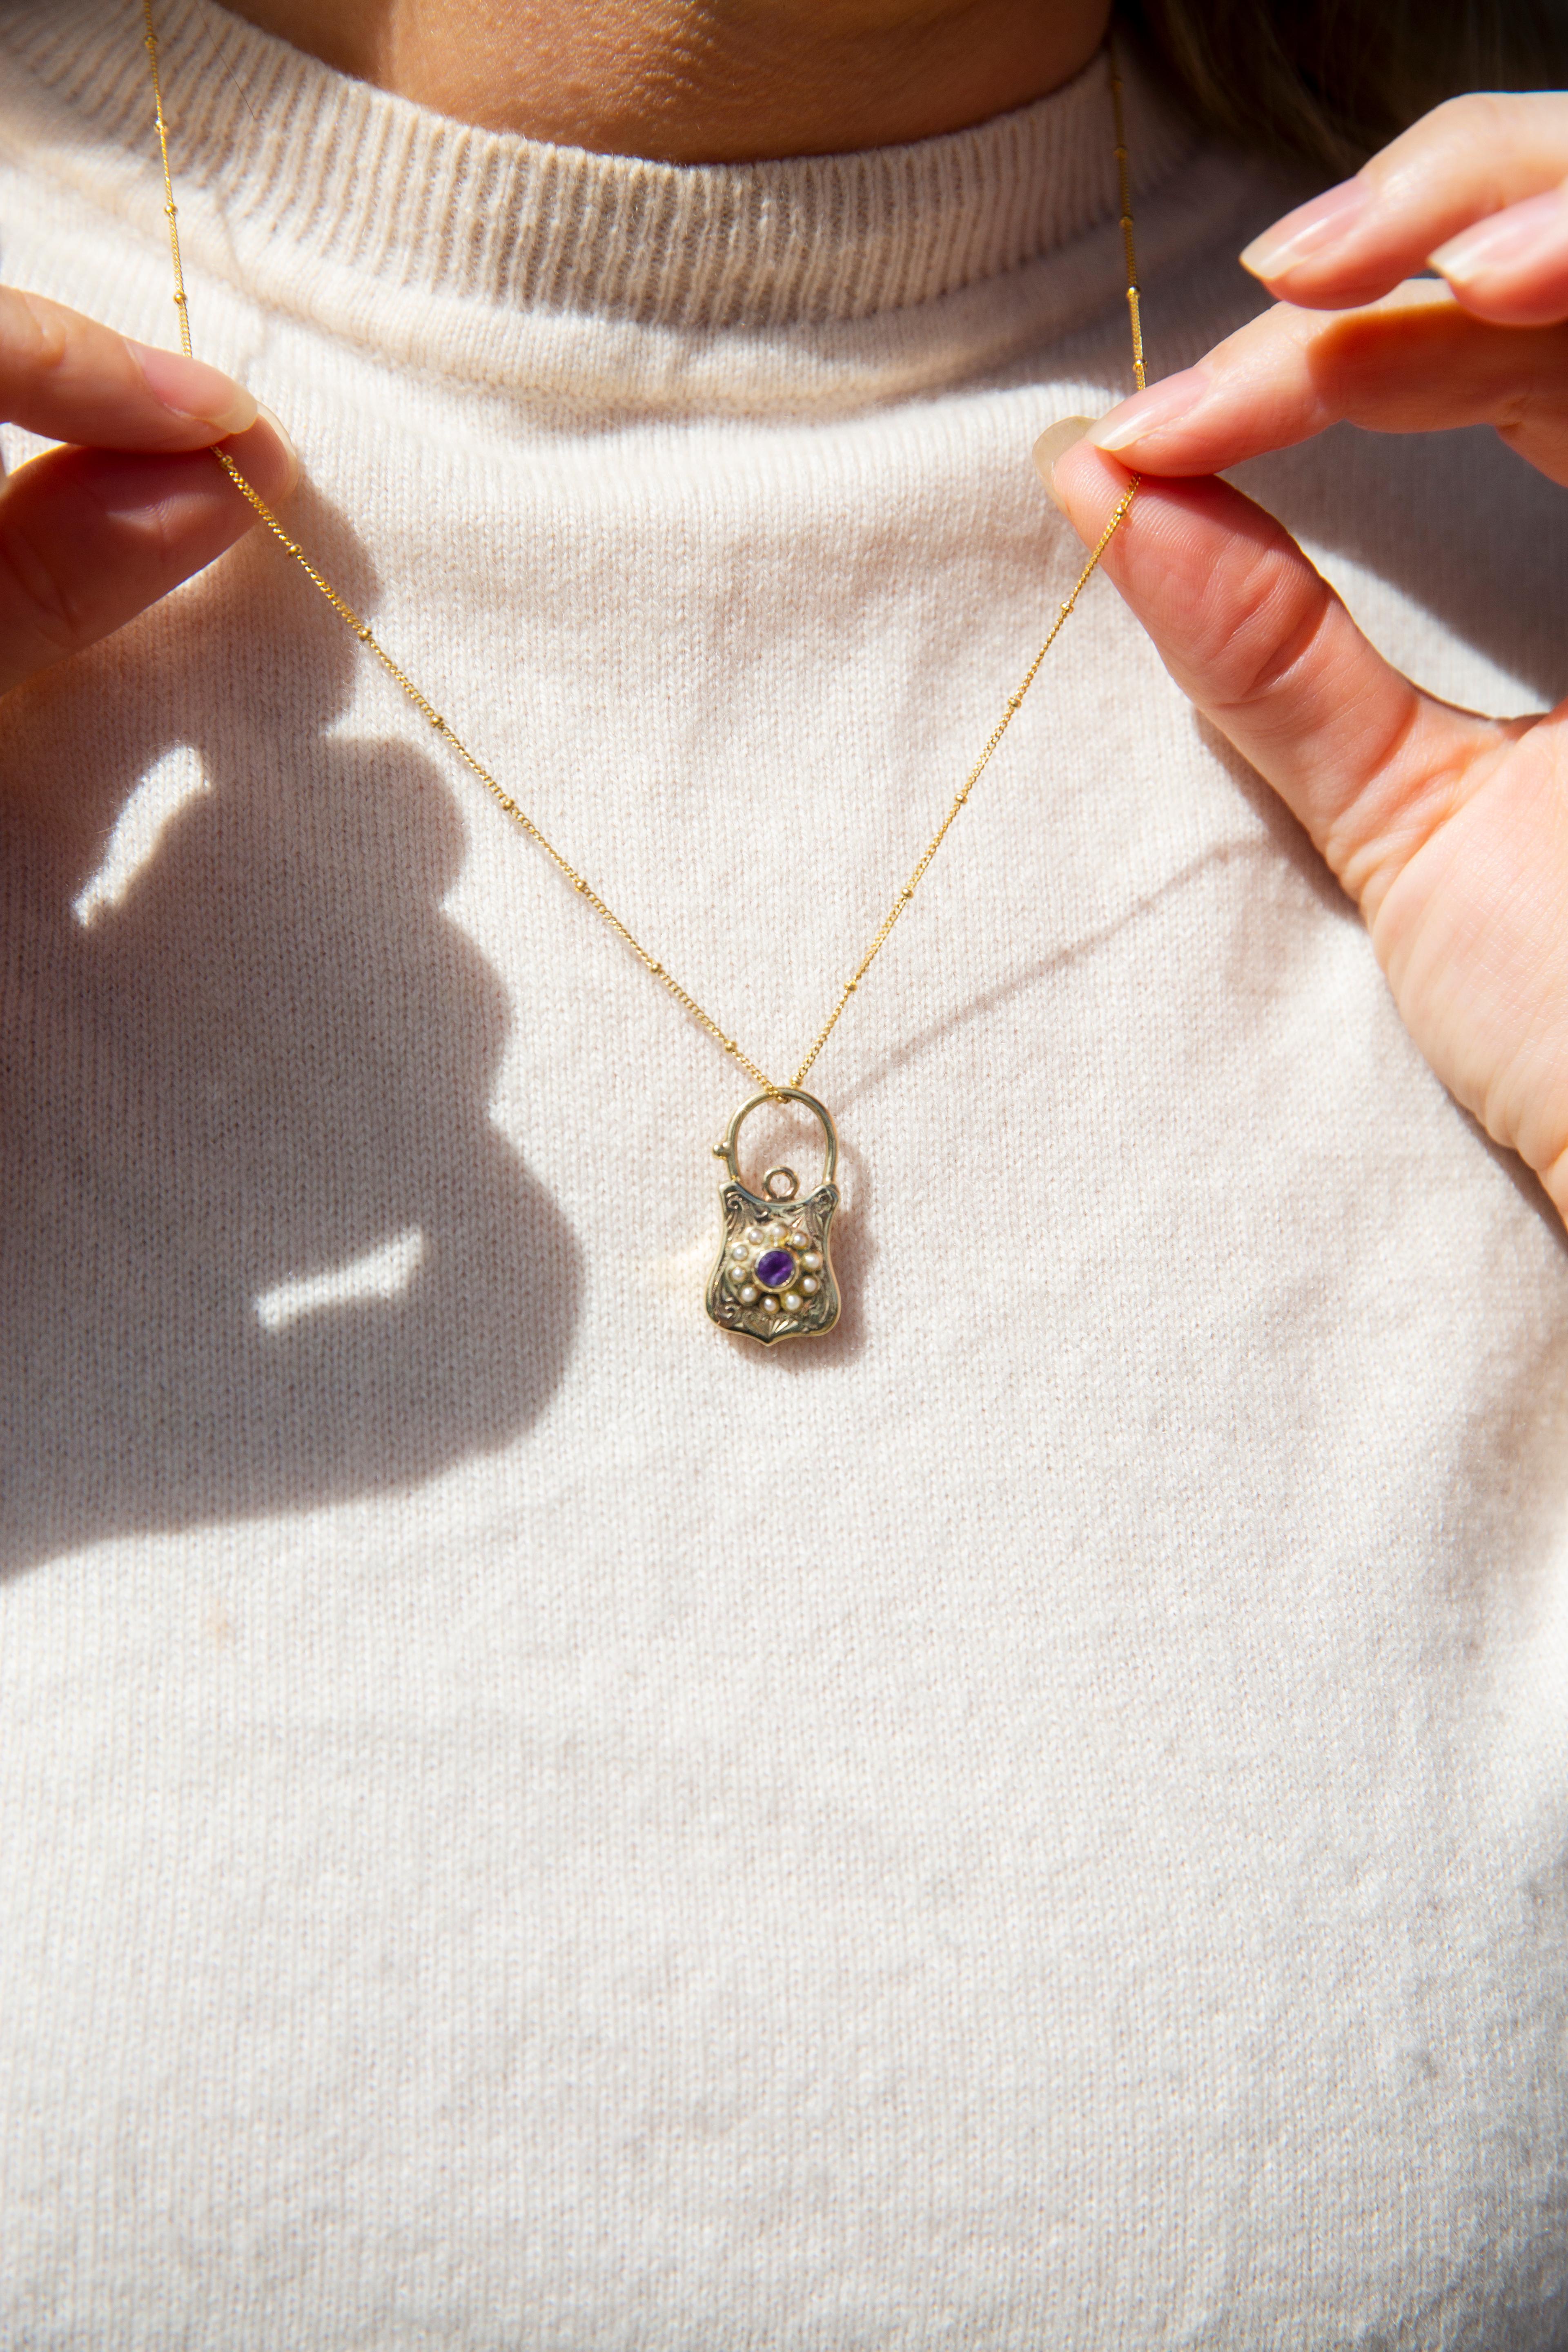 The Andree Pendant is lovingly crafted in 9 carat gold, her decoratively etched front framing an alluring amethyst and seed pearl flower. A sweet vintage inclusion in any collection.

The Andree Pendant & Chain Gem Details
The faceted round bright